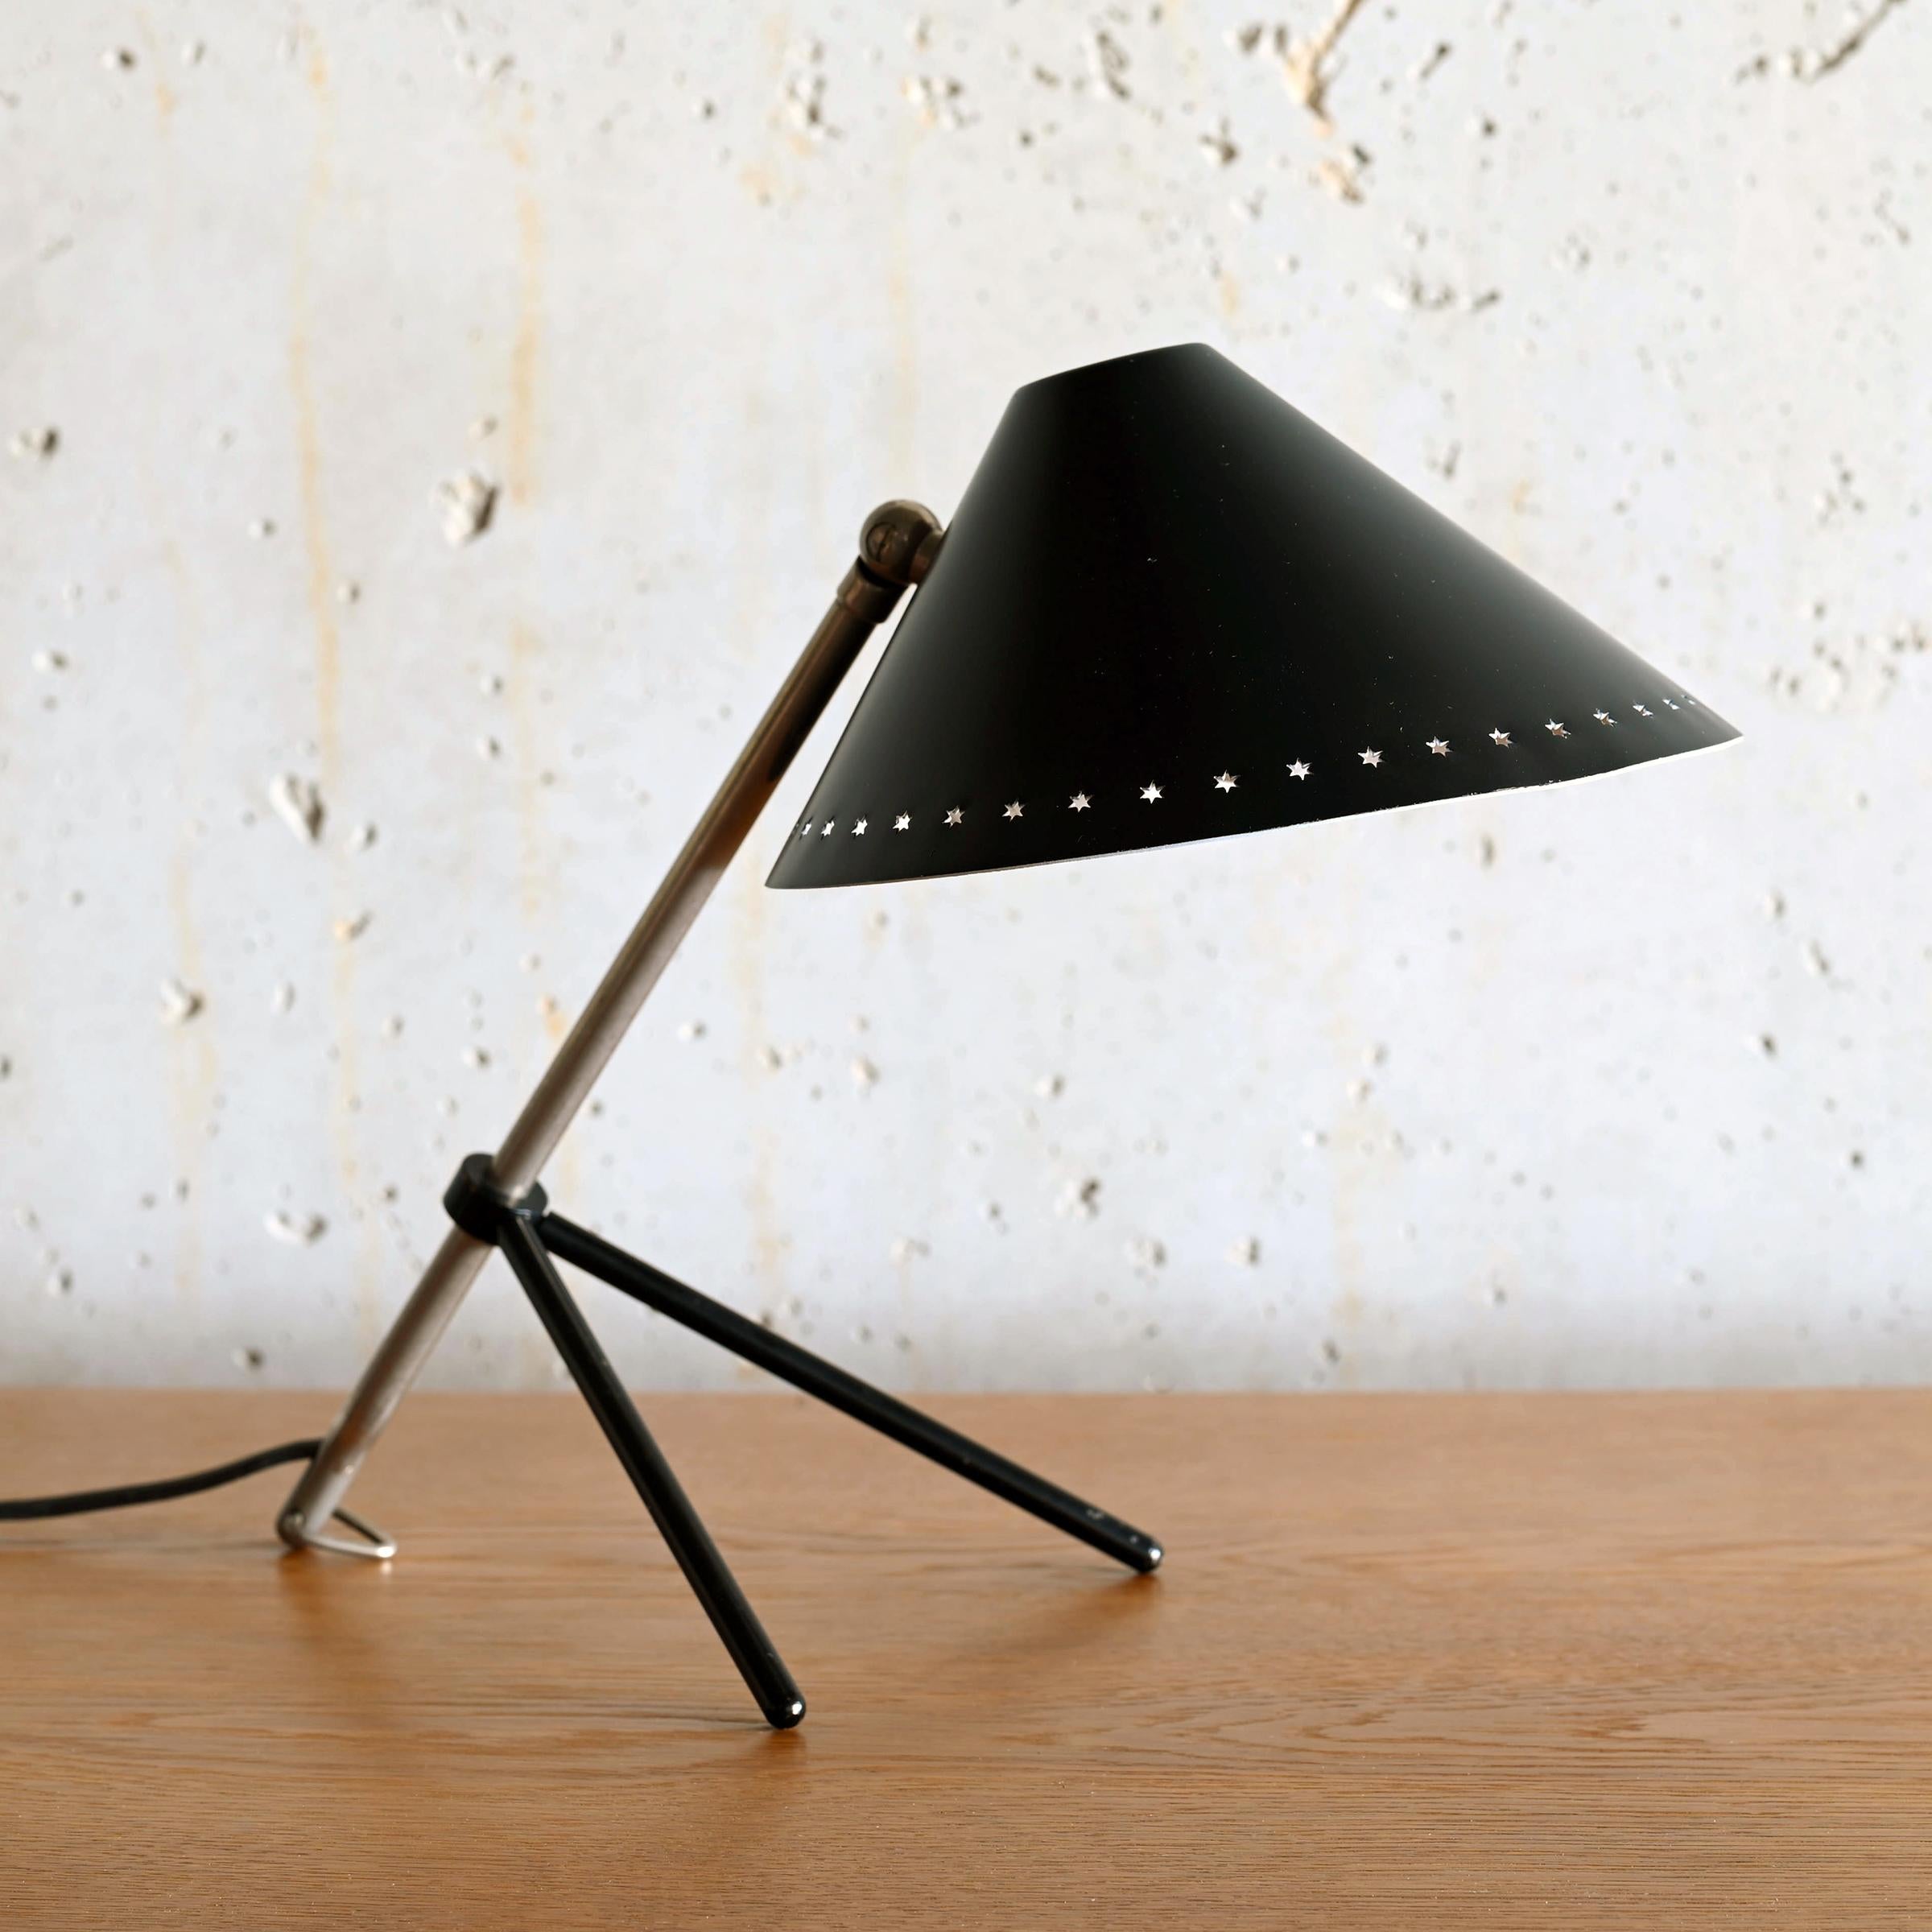 Mid-Century Modern Pinocchio Lamp with black shade by H. Busquet for Hala Zeist, Netherlands For Sale